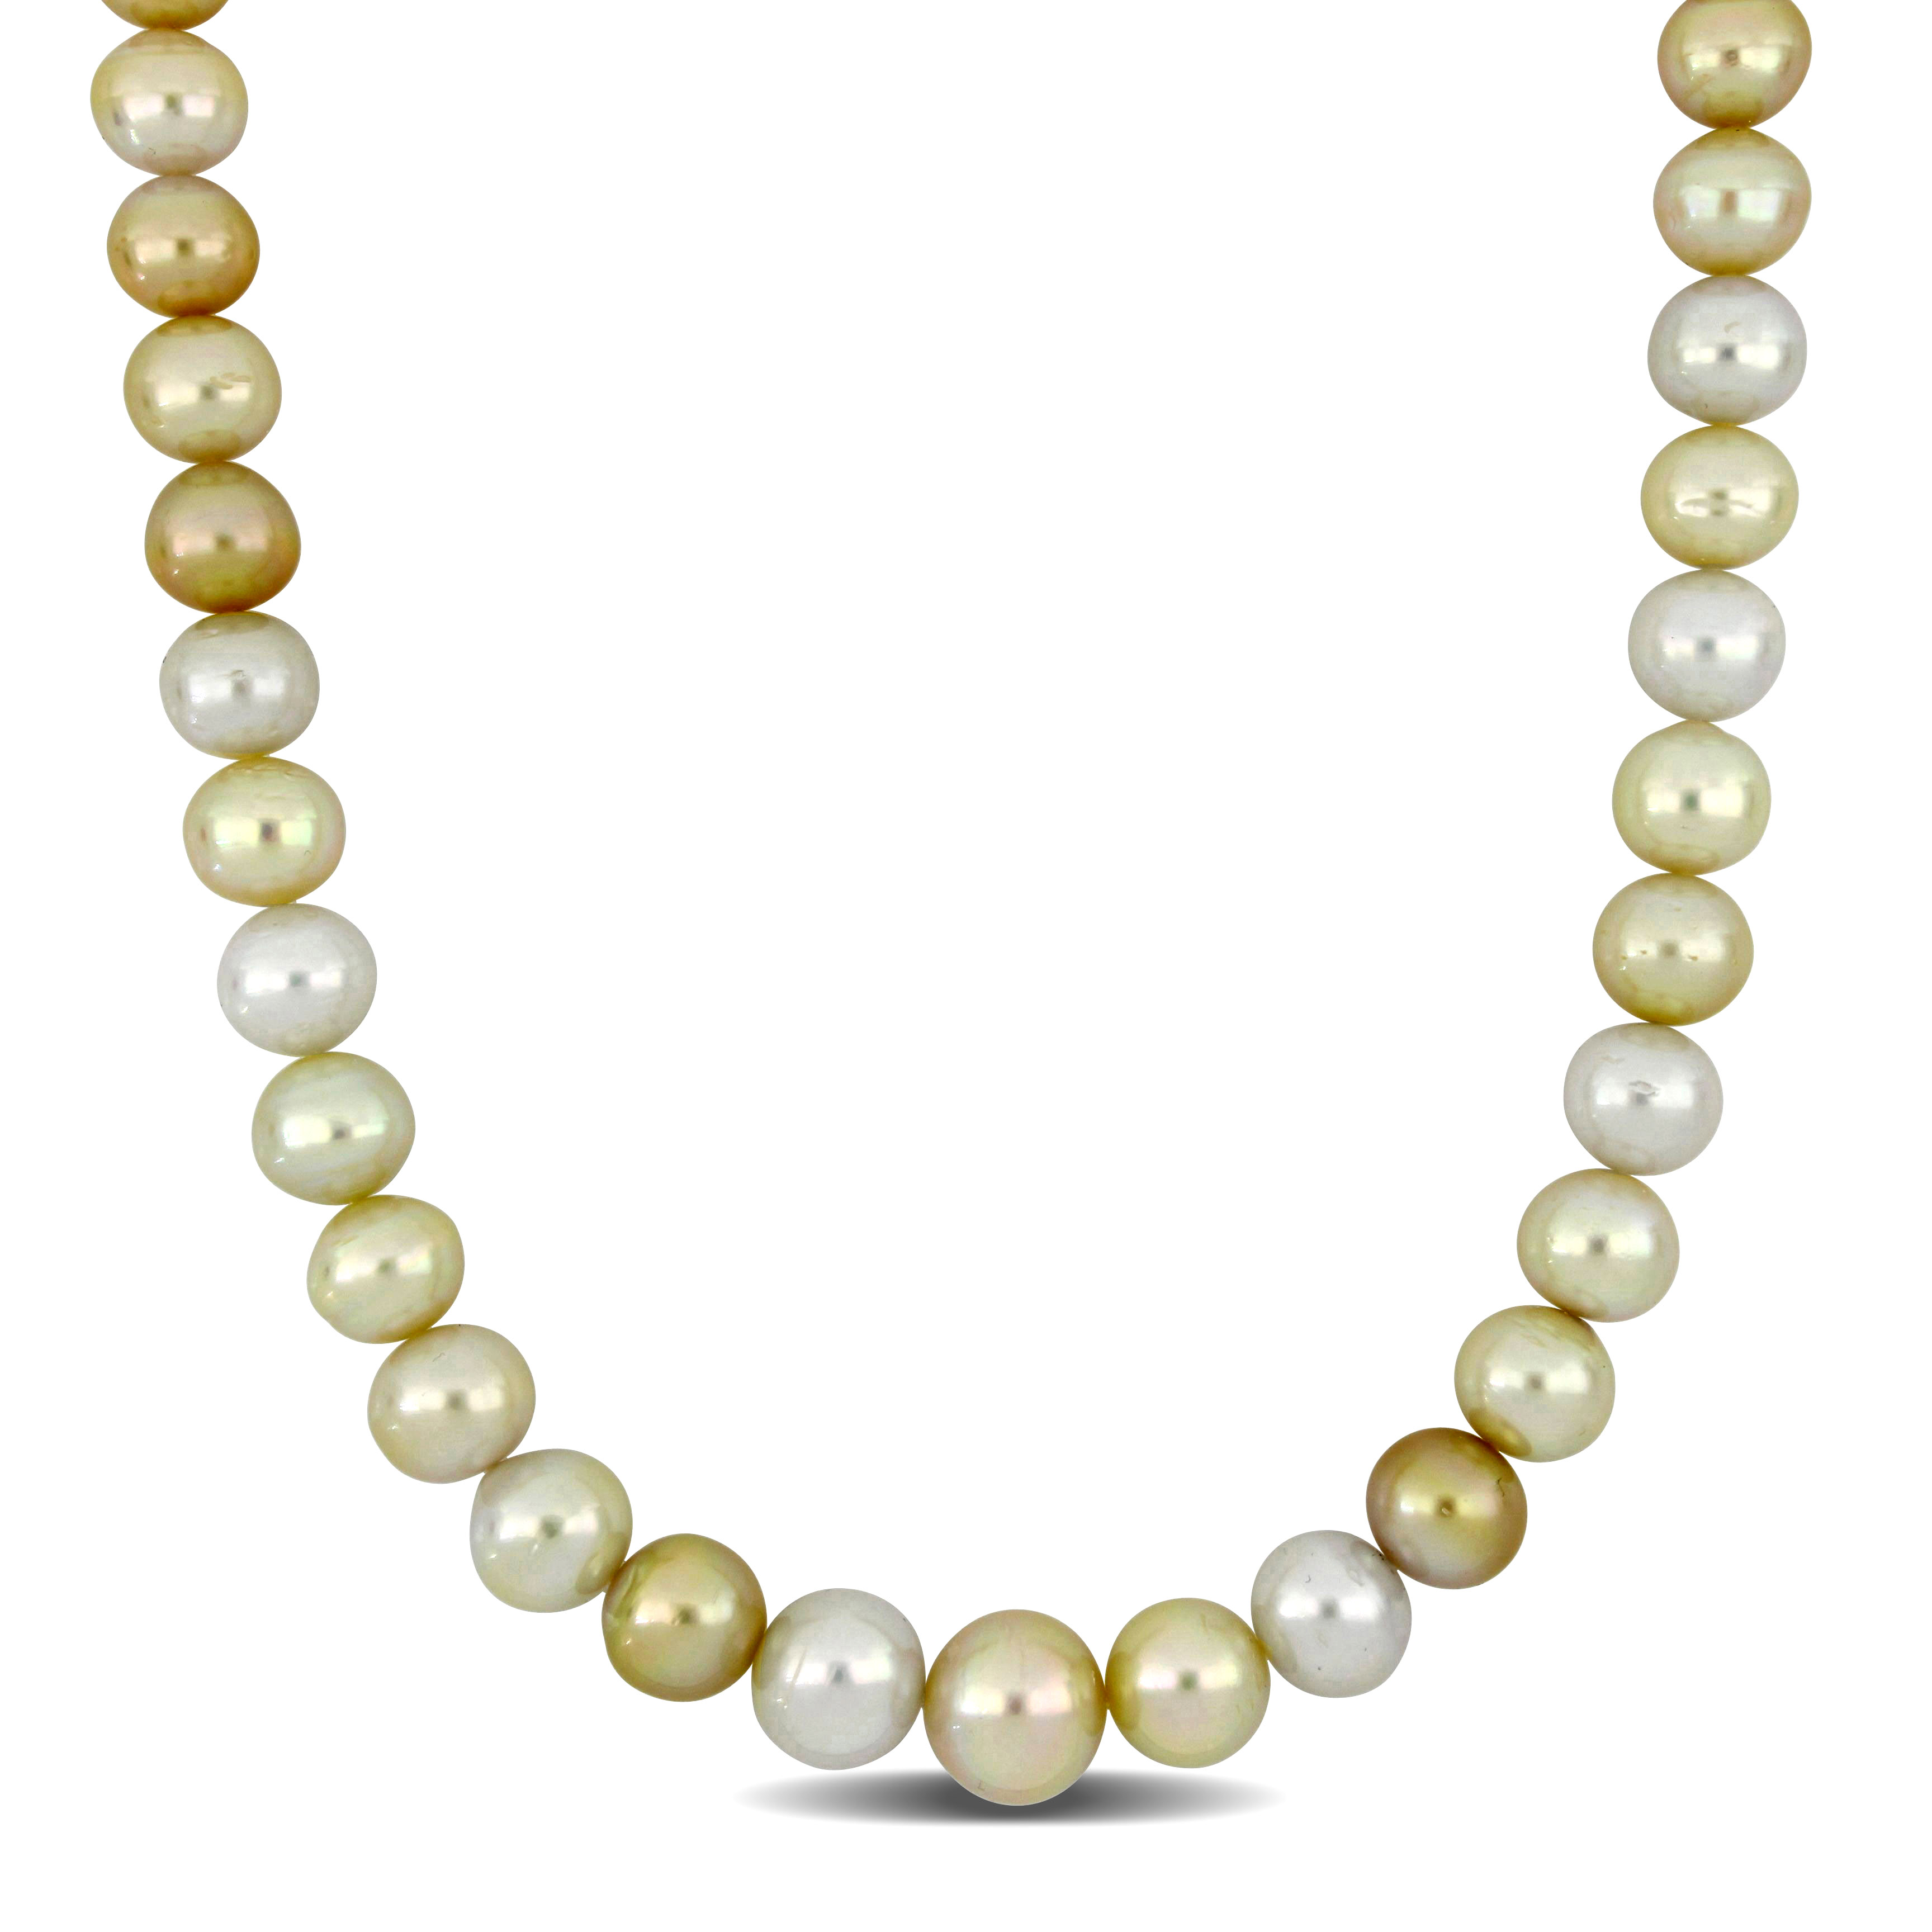 10-13 MM White and Golden South Sea Cultured Pearl Necklace in 14k Yellow Gold - 18 in